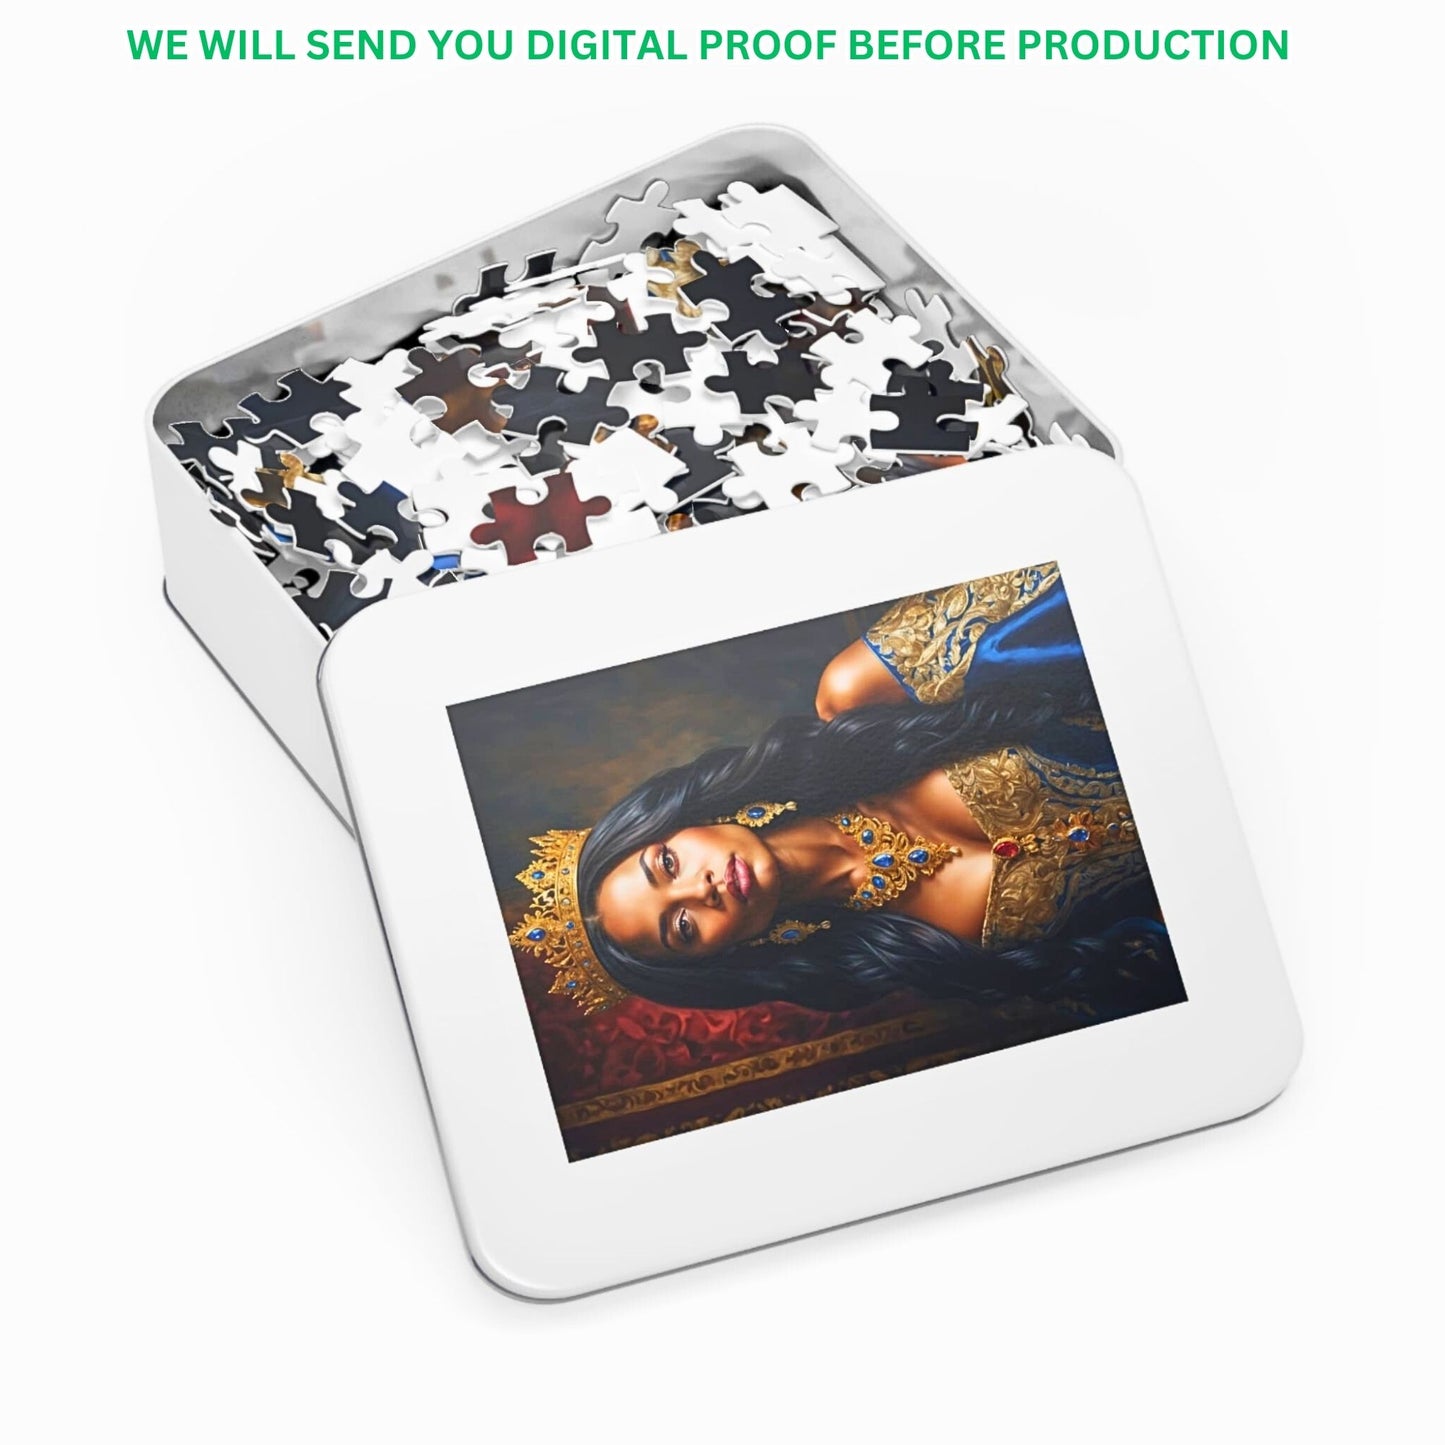 Discover the magic of personalized queen puzzles at PuzzlePortraits.com. Perfect for birthdays and heartfelt gifts, our puzzles blend renaissance artistry with modern digital craftsmanship. Each puzzle is a tribute to elegance and creativity, featuring intricate details designed with AI precision. Create a unique keepsake that celebrates your loved ones in a timeless, artistic form. Dive into our collection and unlock the beauty of custom puzzle portraits today!